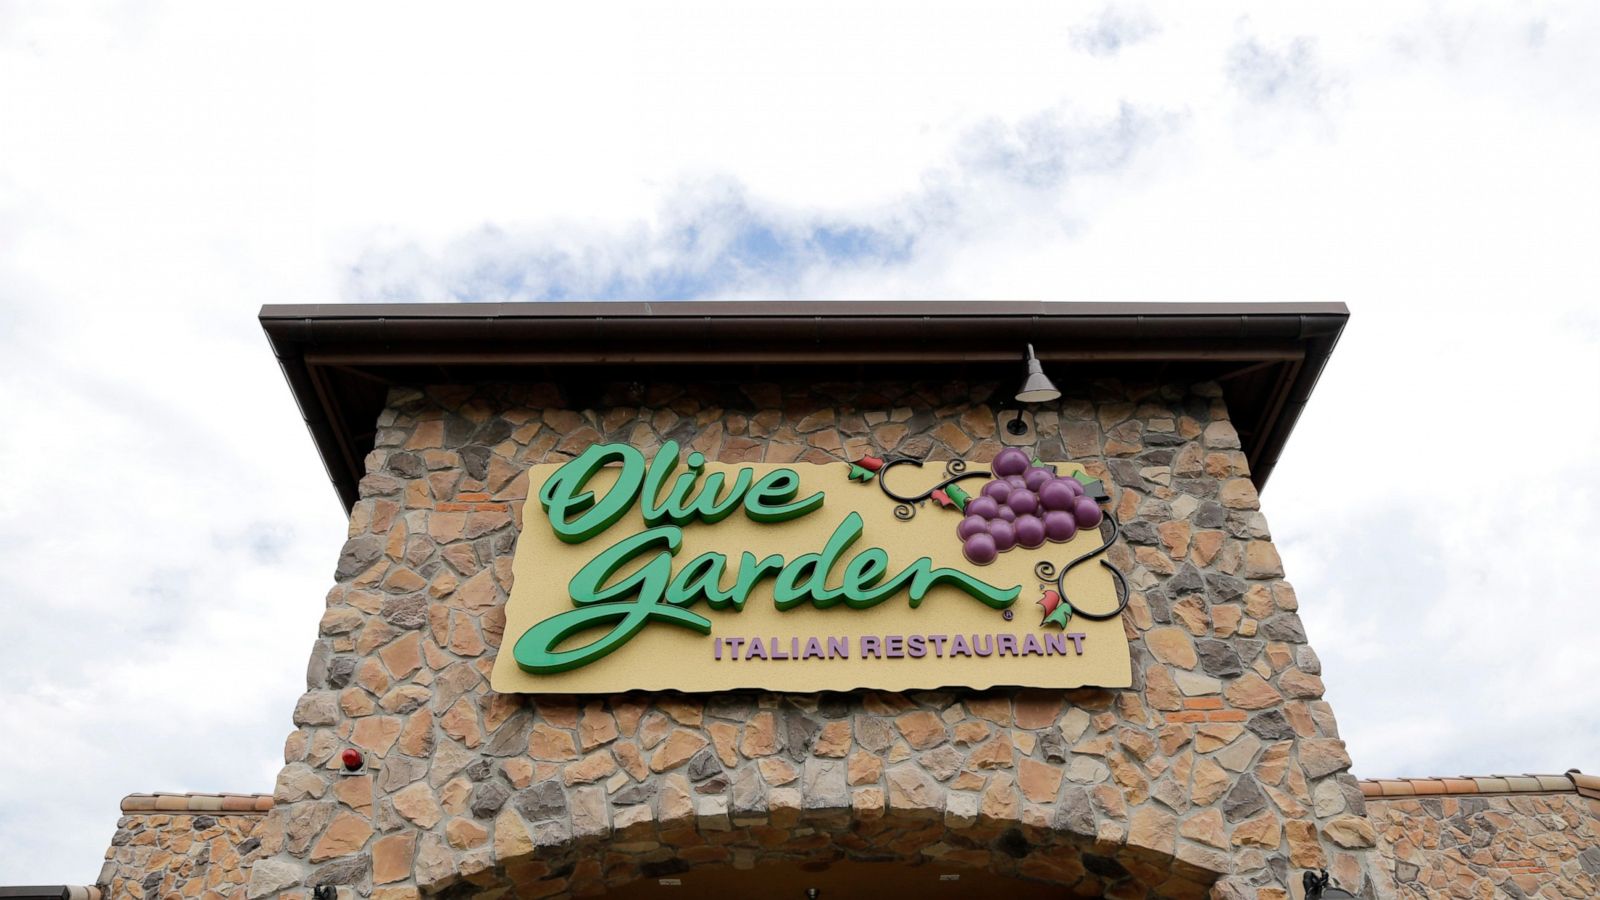 Free Breadsticks And Reasons For Hope At Olive Garden Abc News